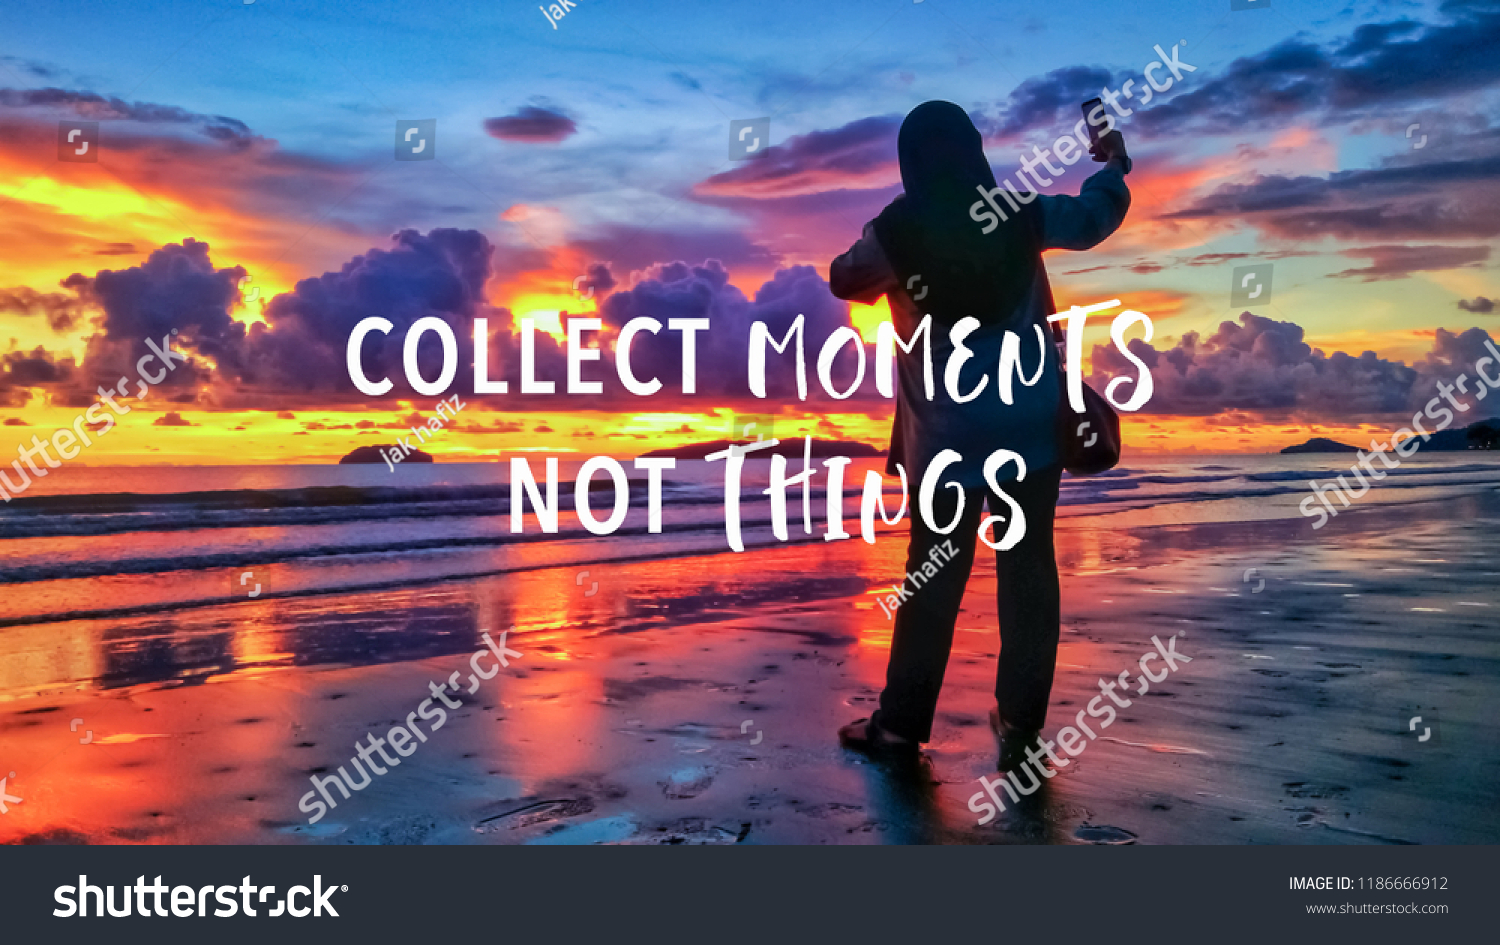 Collect moments not things quote against female taking picture with smartphone during sunset background.  #1186666912